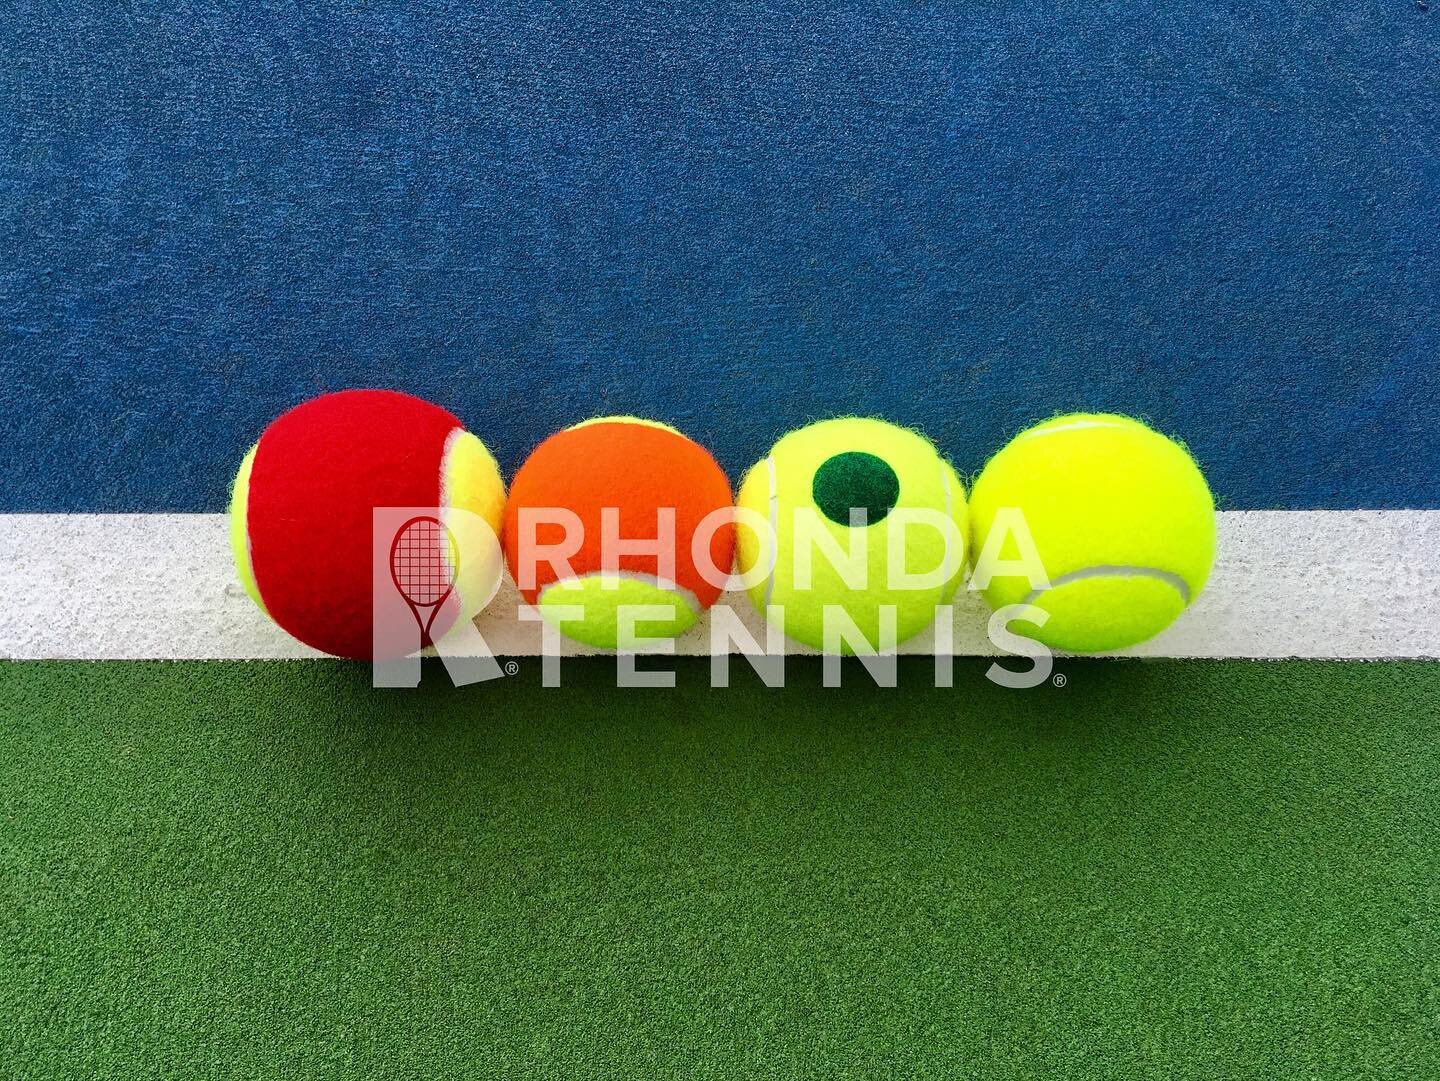 Transition tennis balls: red, orange, and green dot. Regular tennis balls are YELLOW. If you disagree, please schedule an appointment with your optometrist for a color blind test 🤓.

Half jokes aside, I use red balls for all beginners of all ages. T